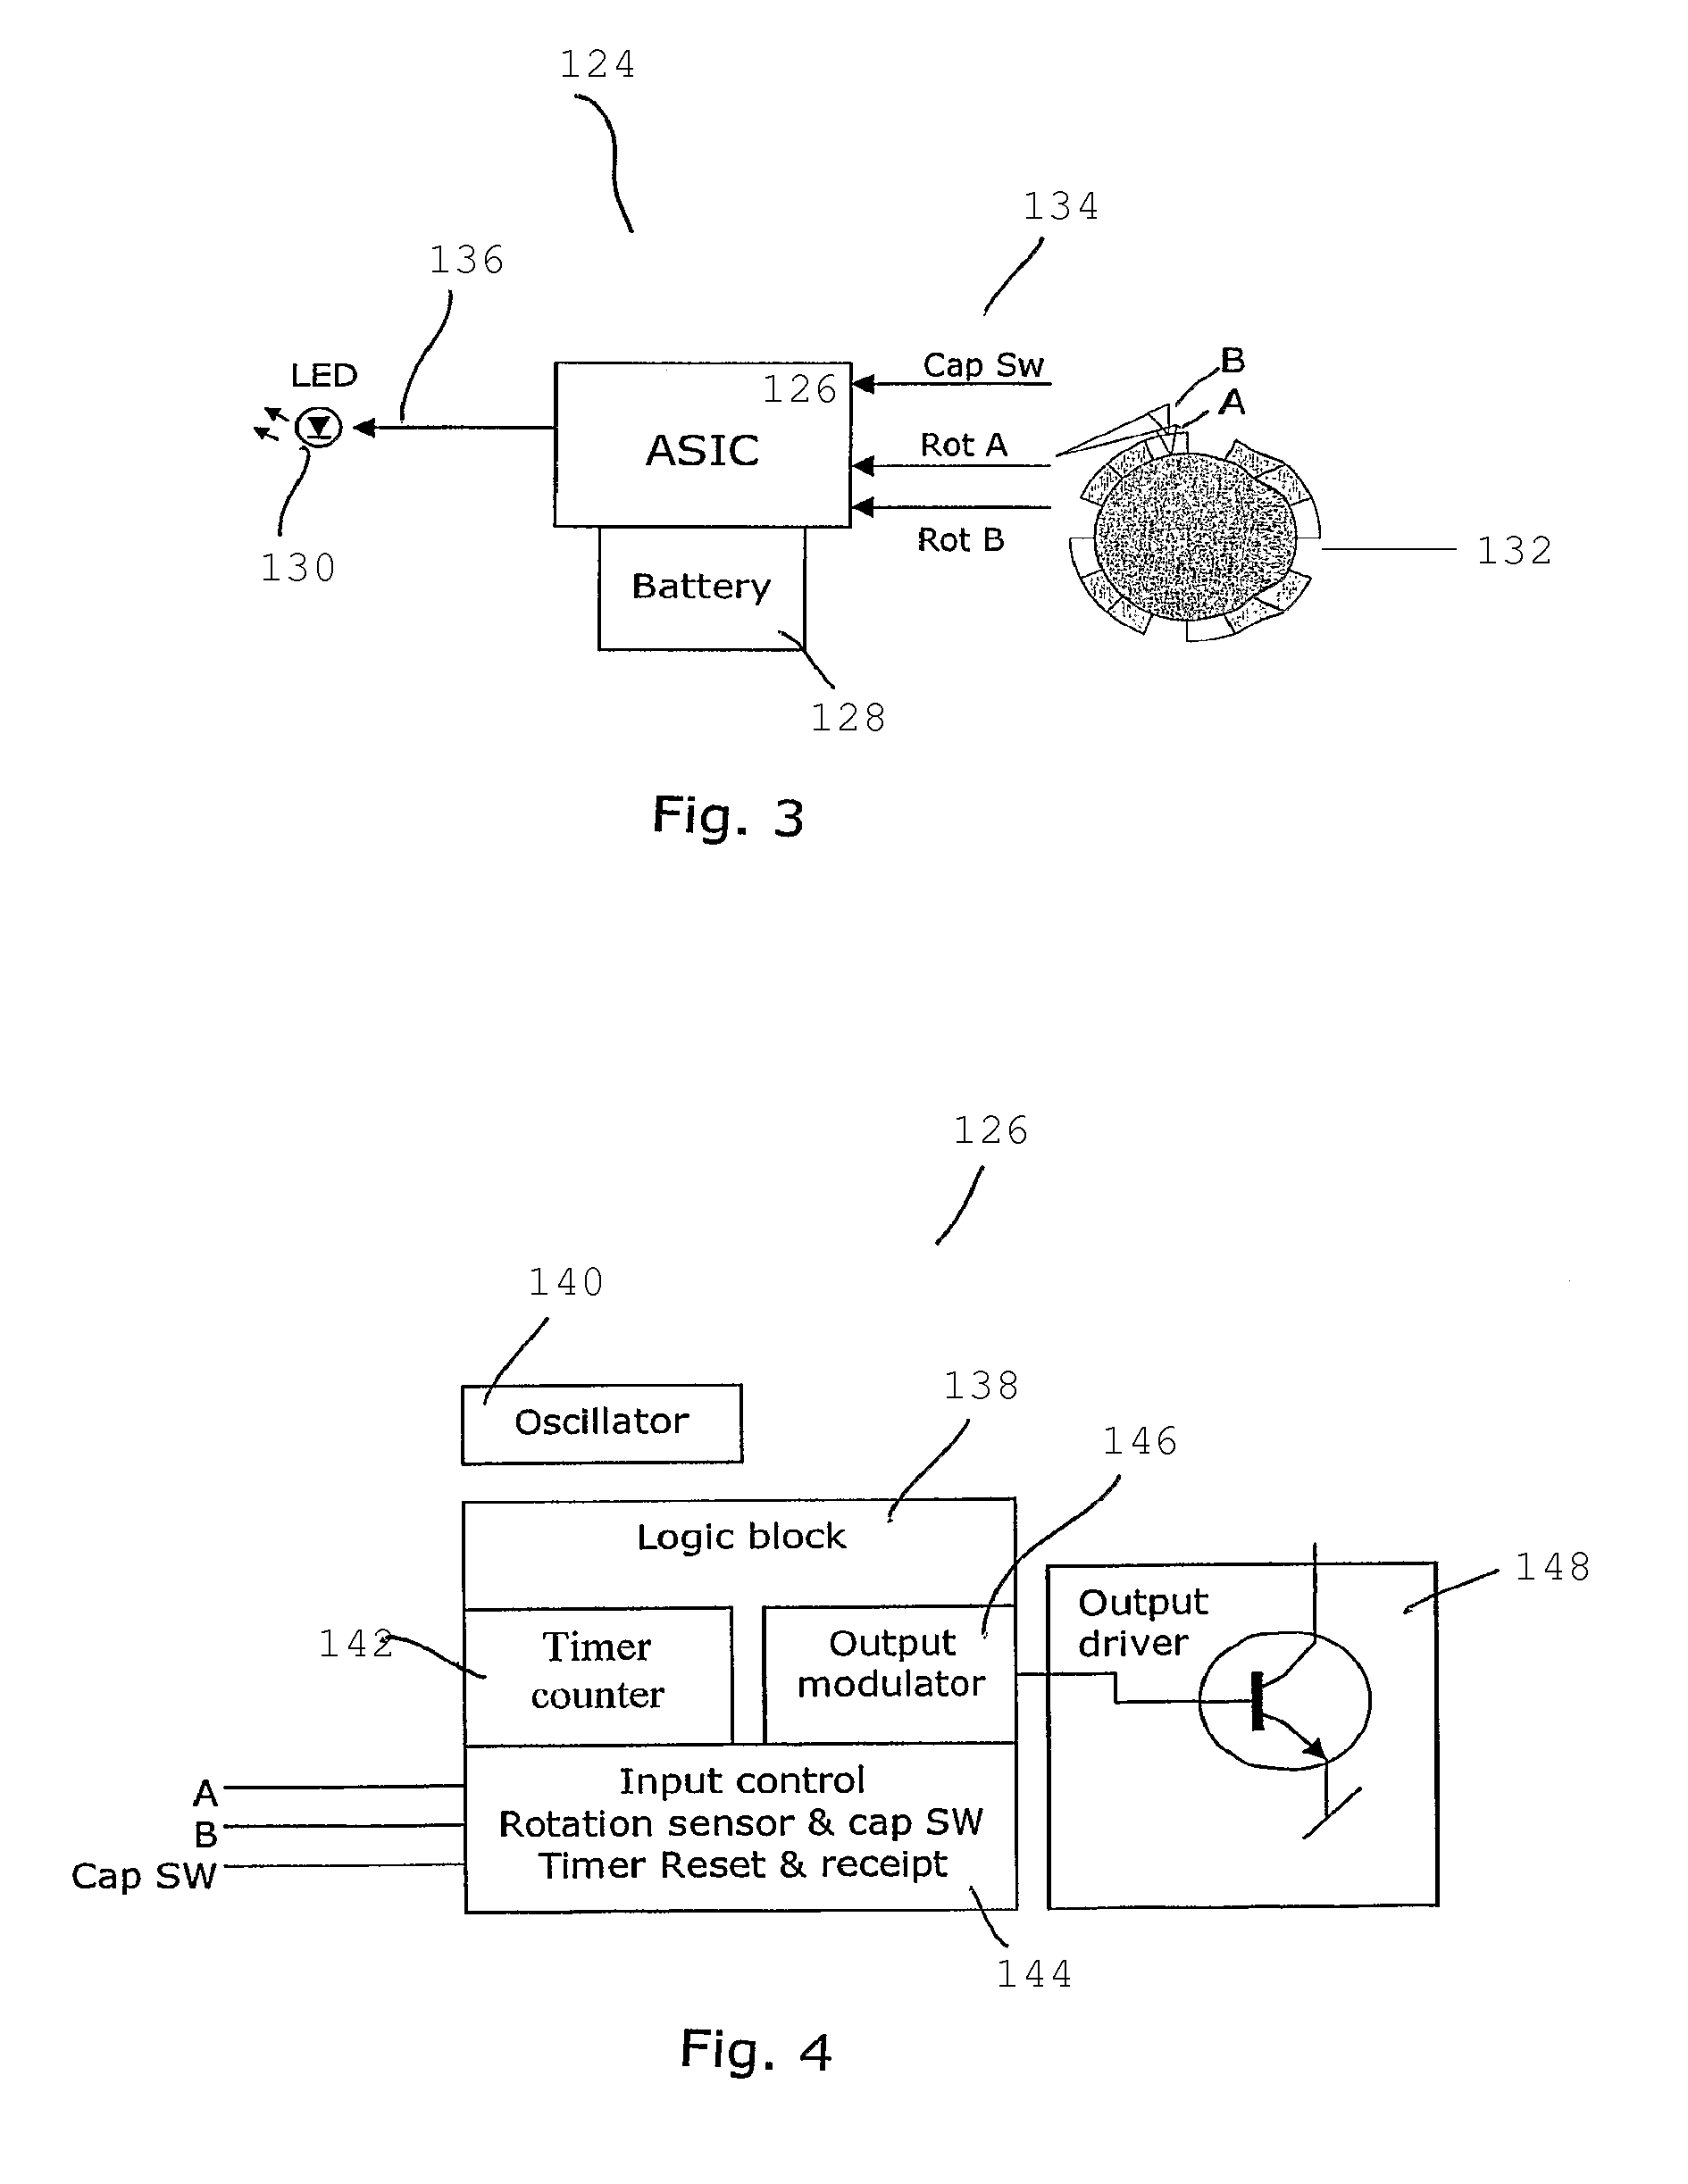 Injection device with means for signalling the time since the last injection